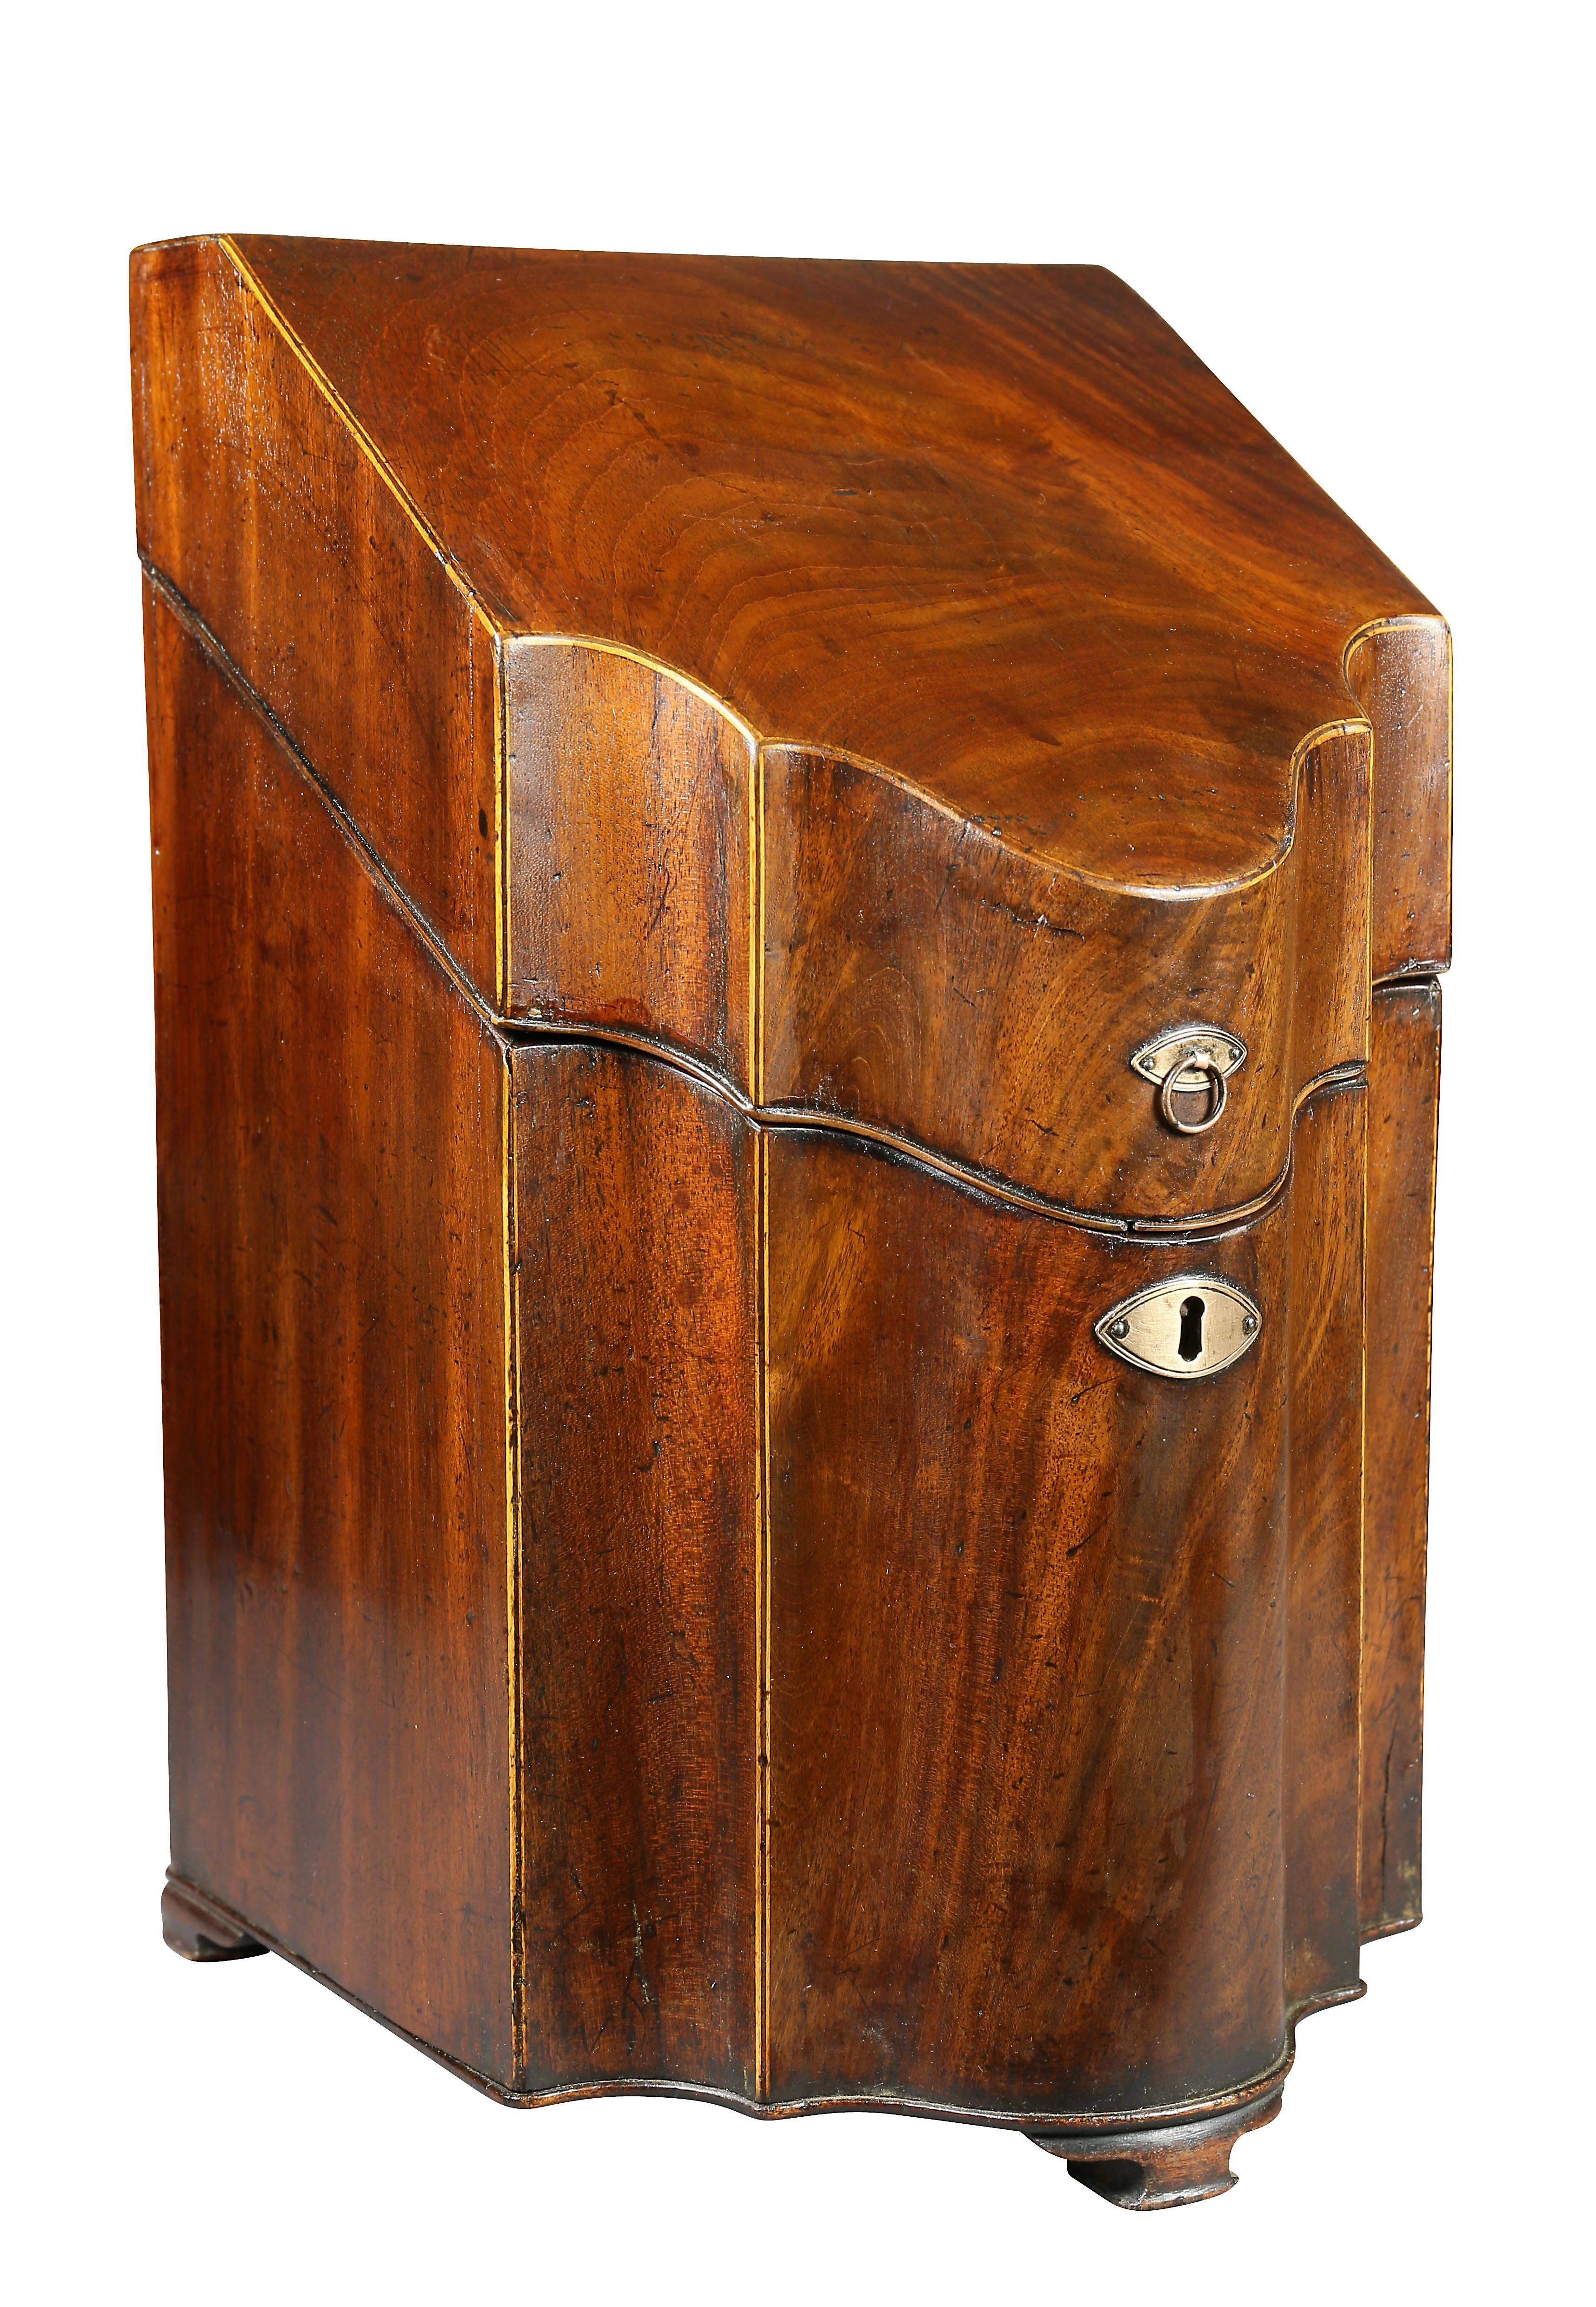 Each with hinged slant lids opening to a fitted interior. Conforming serpentine shaped front with bracket feet.